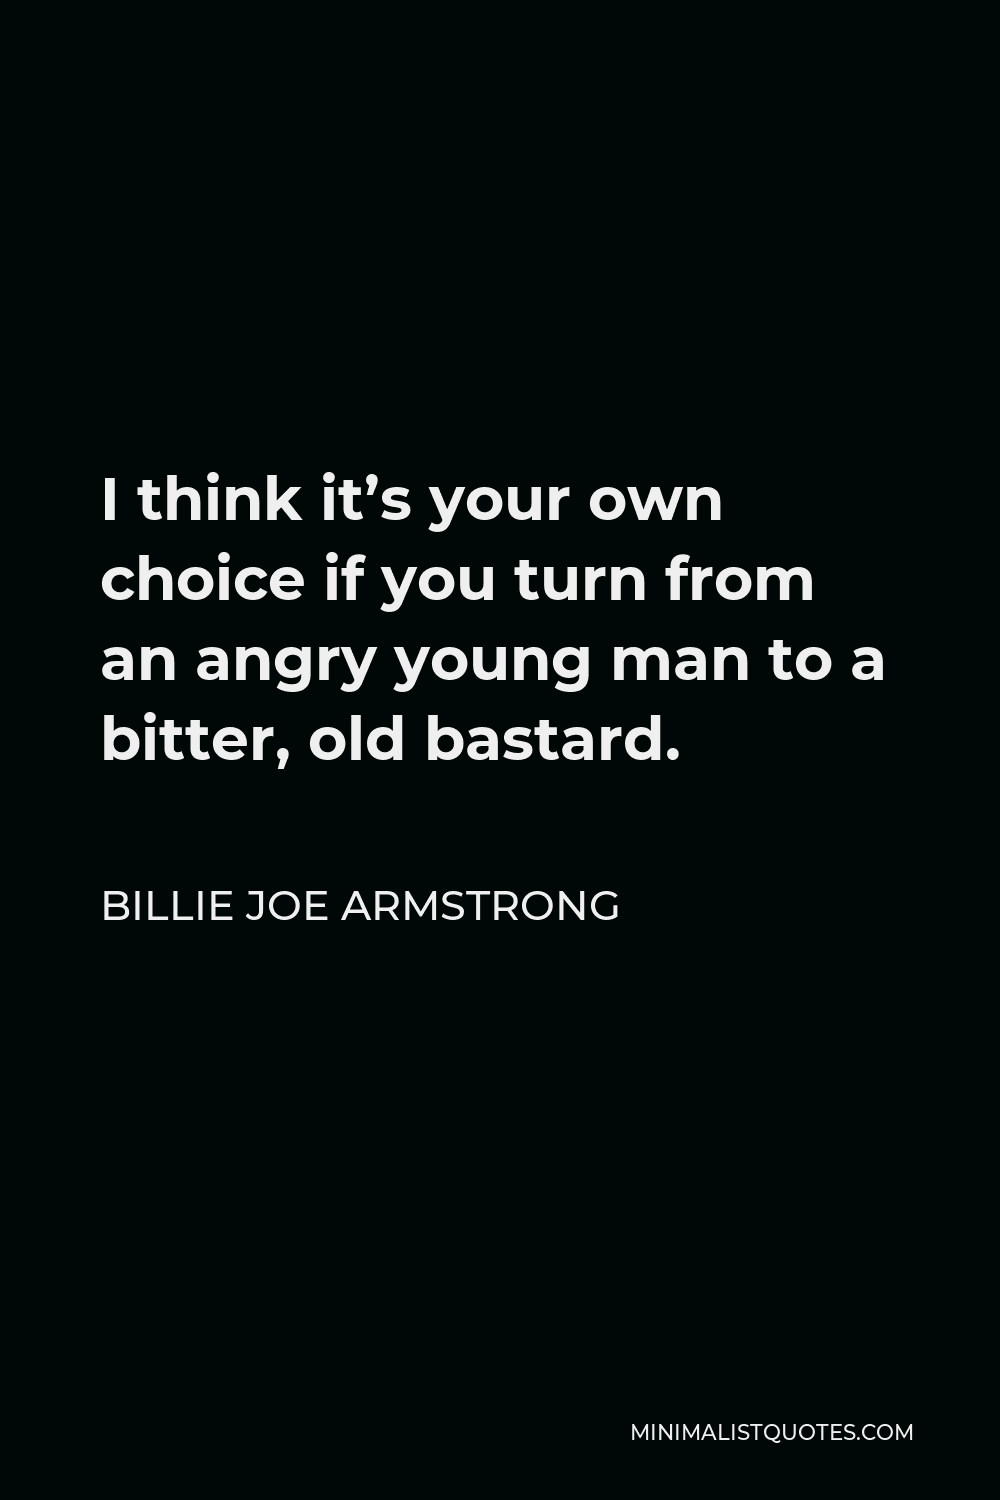 Billie Joe Armstrong Quote - I think it’s your own choice if you turn from an angry young man to a bitter, old bastard.